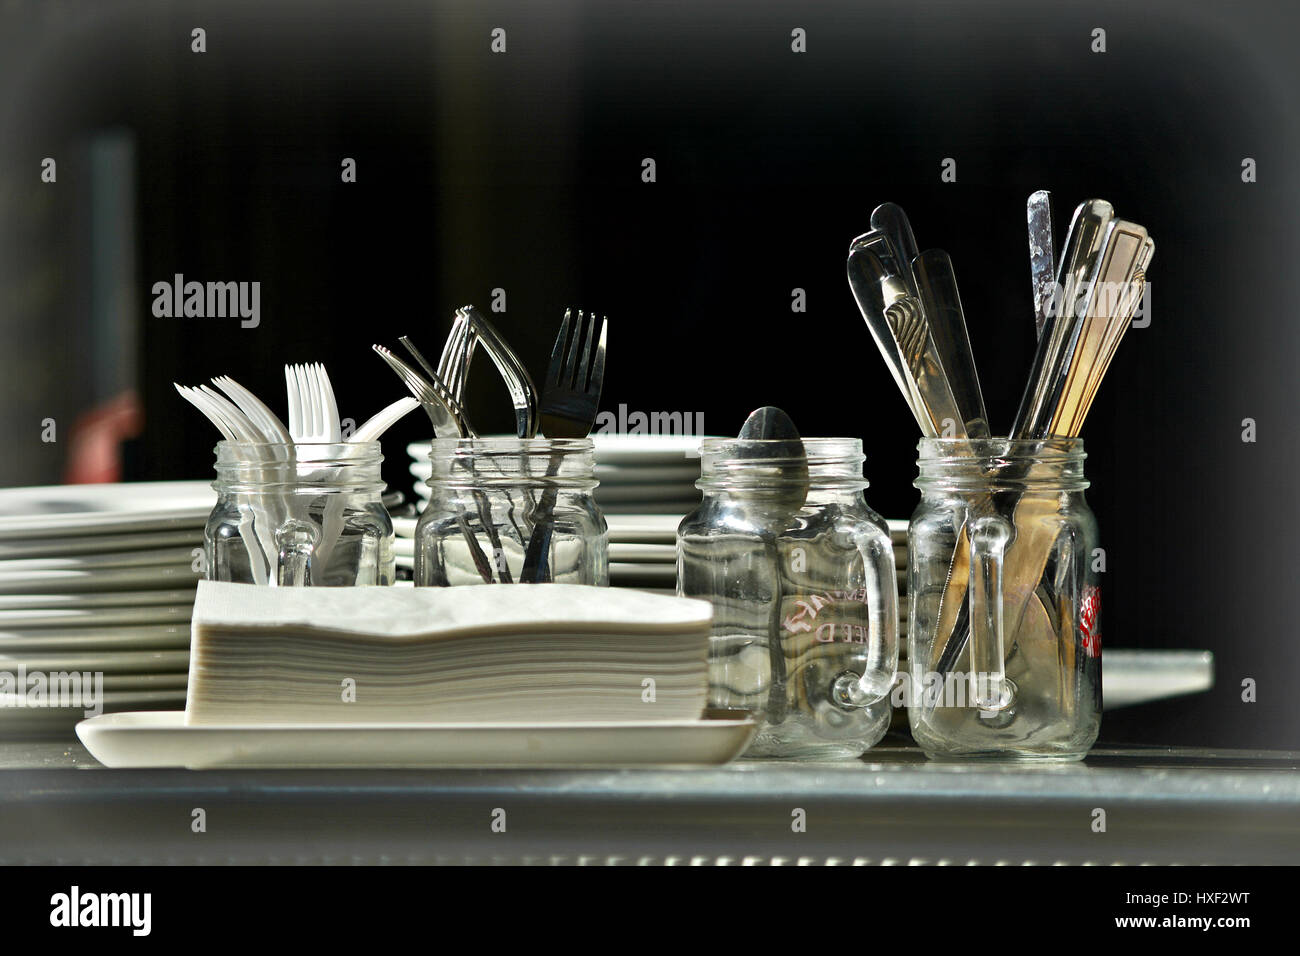 An Almost Black And White Still Life Of Plates, Jars And Cutlery Stock Photo